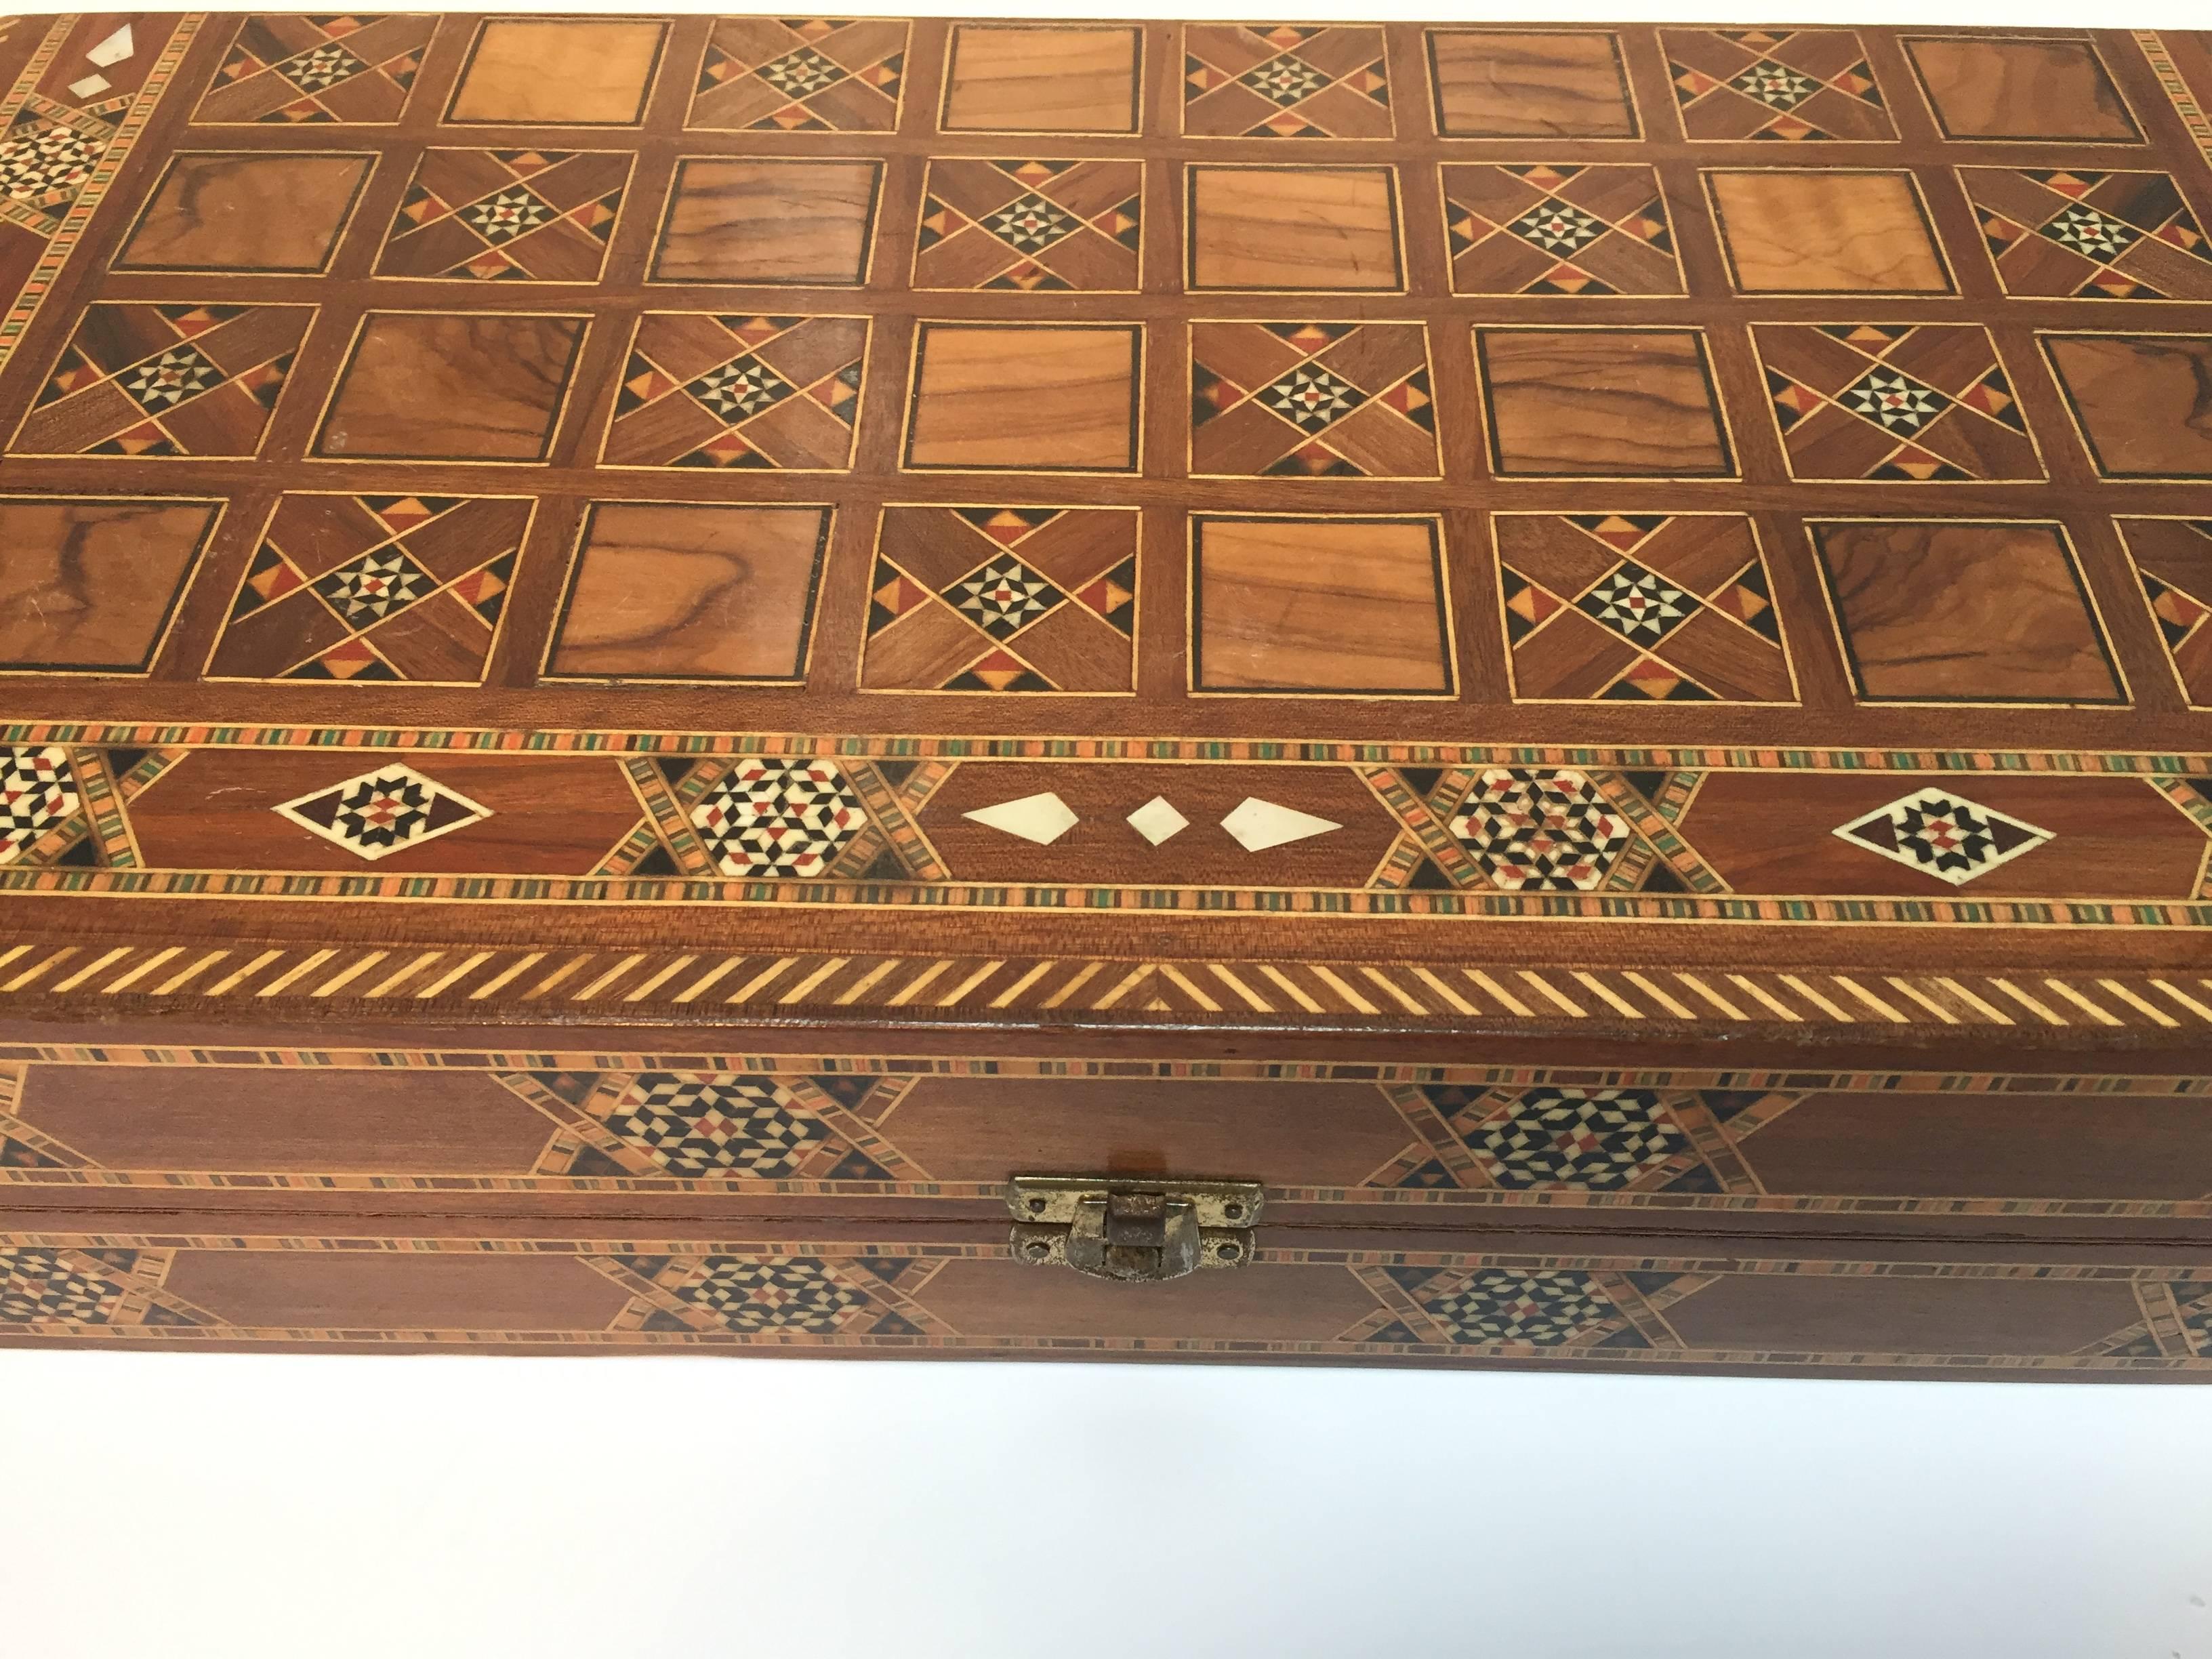 Fine large Syrian inlaid marquetry mosaic backgammon and chess game box.
Amazing craftsmanship the intricate marquetry fruitwood in mosaic Moorish geometric pattern and mother-of-pearl inlay and fine precision makes it a true work of